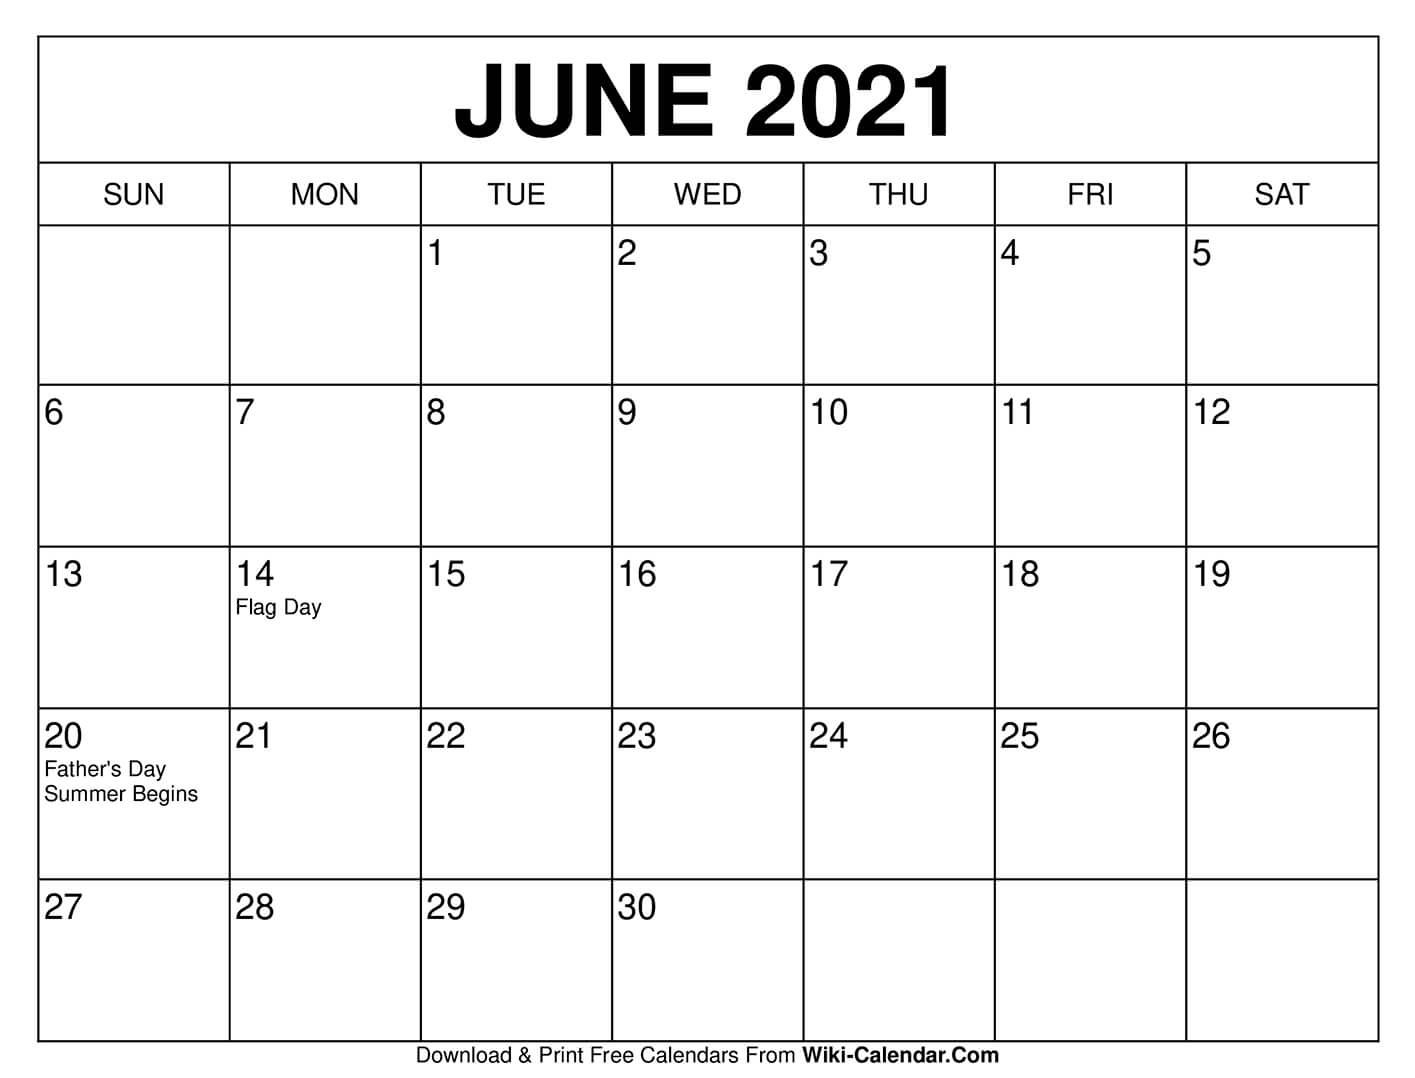 Take 2021 June Calendars To Print Without Downloading